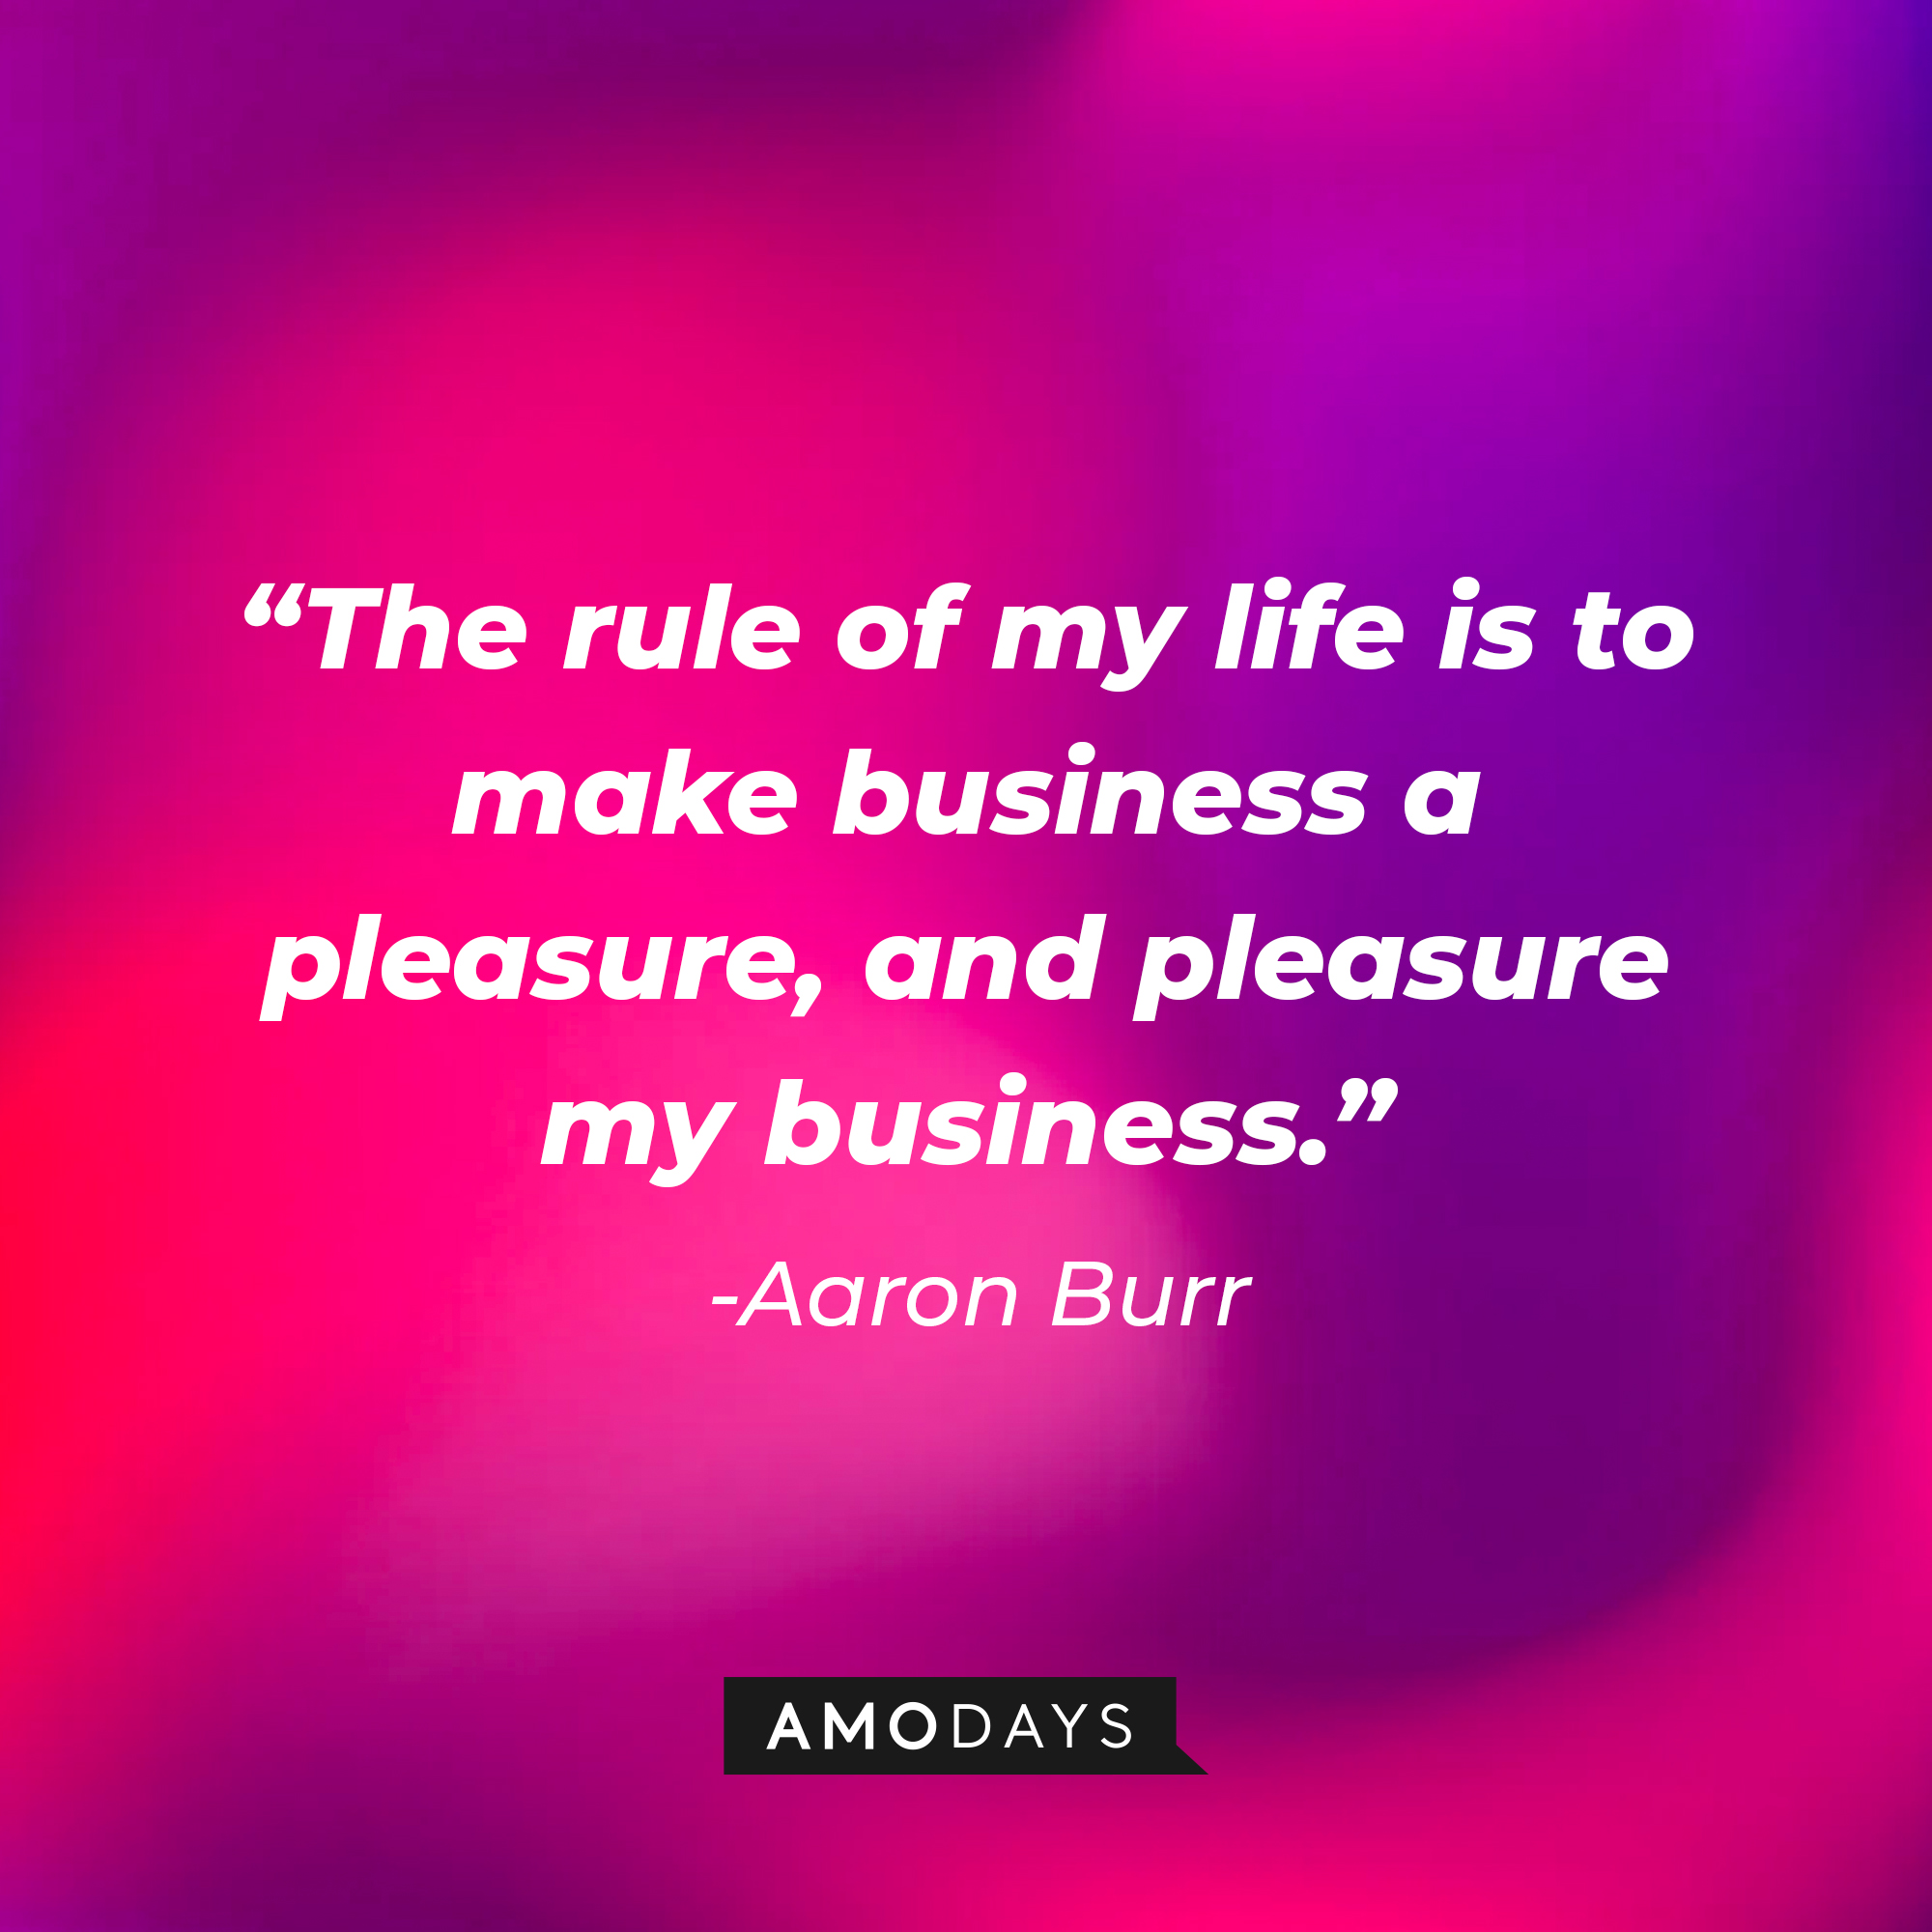 Aaron Burr’s quote: “The rule of my life is to make business a pleasure, and pleasure my business.” | Source: AmoDays